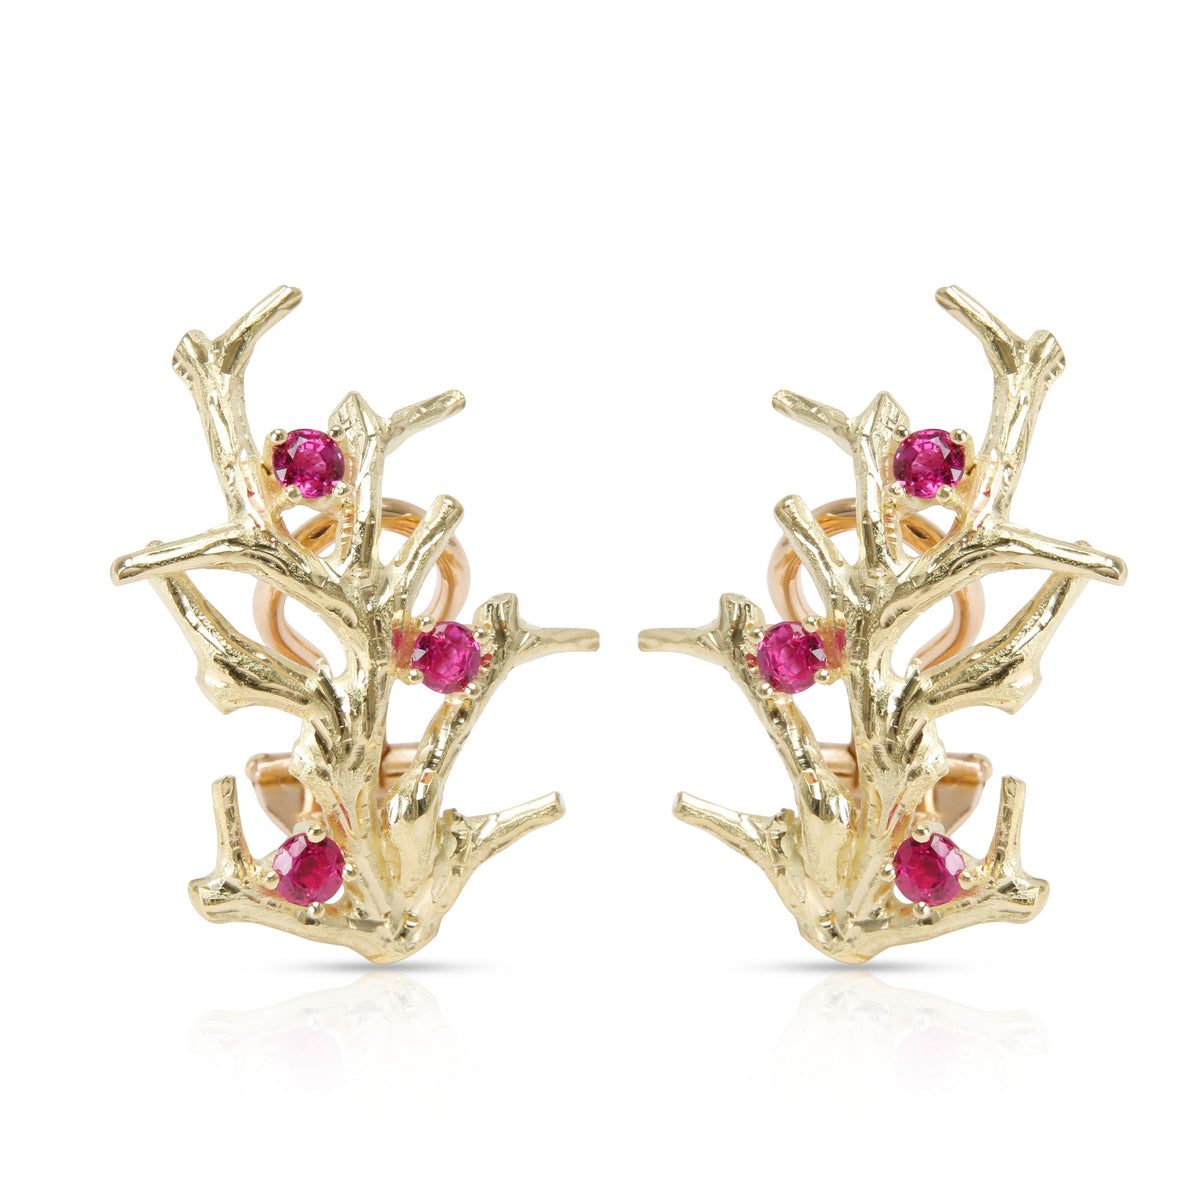 Vintage Tiffany & Co. Coral Pink Sapphire Earrings in 18K Yellow Gold